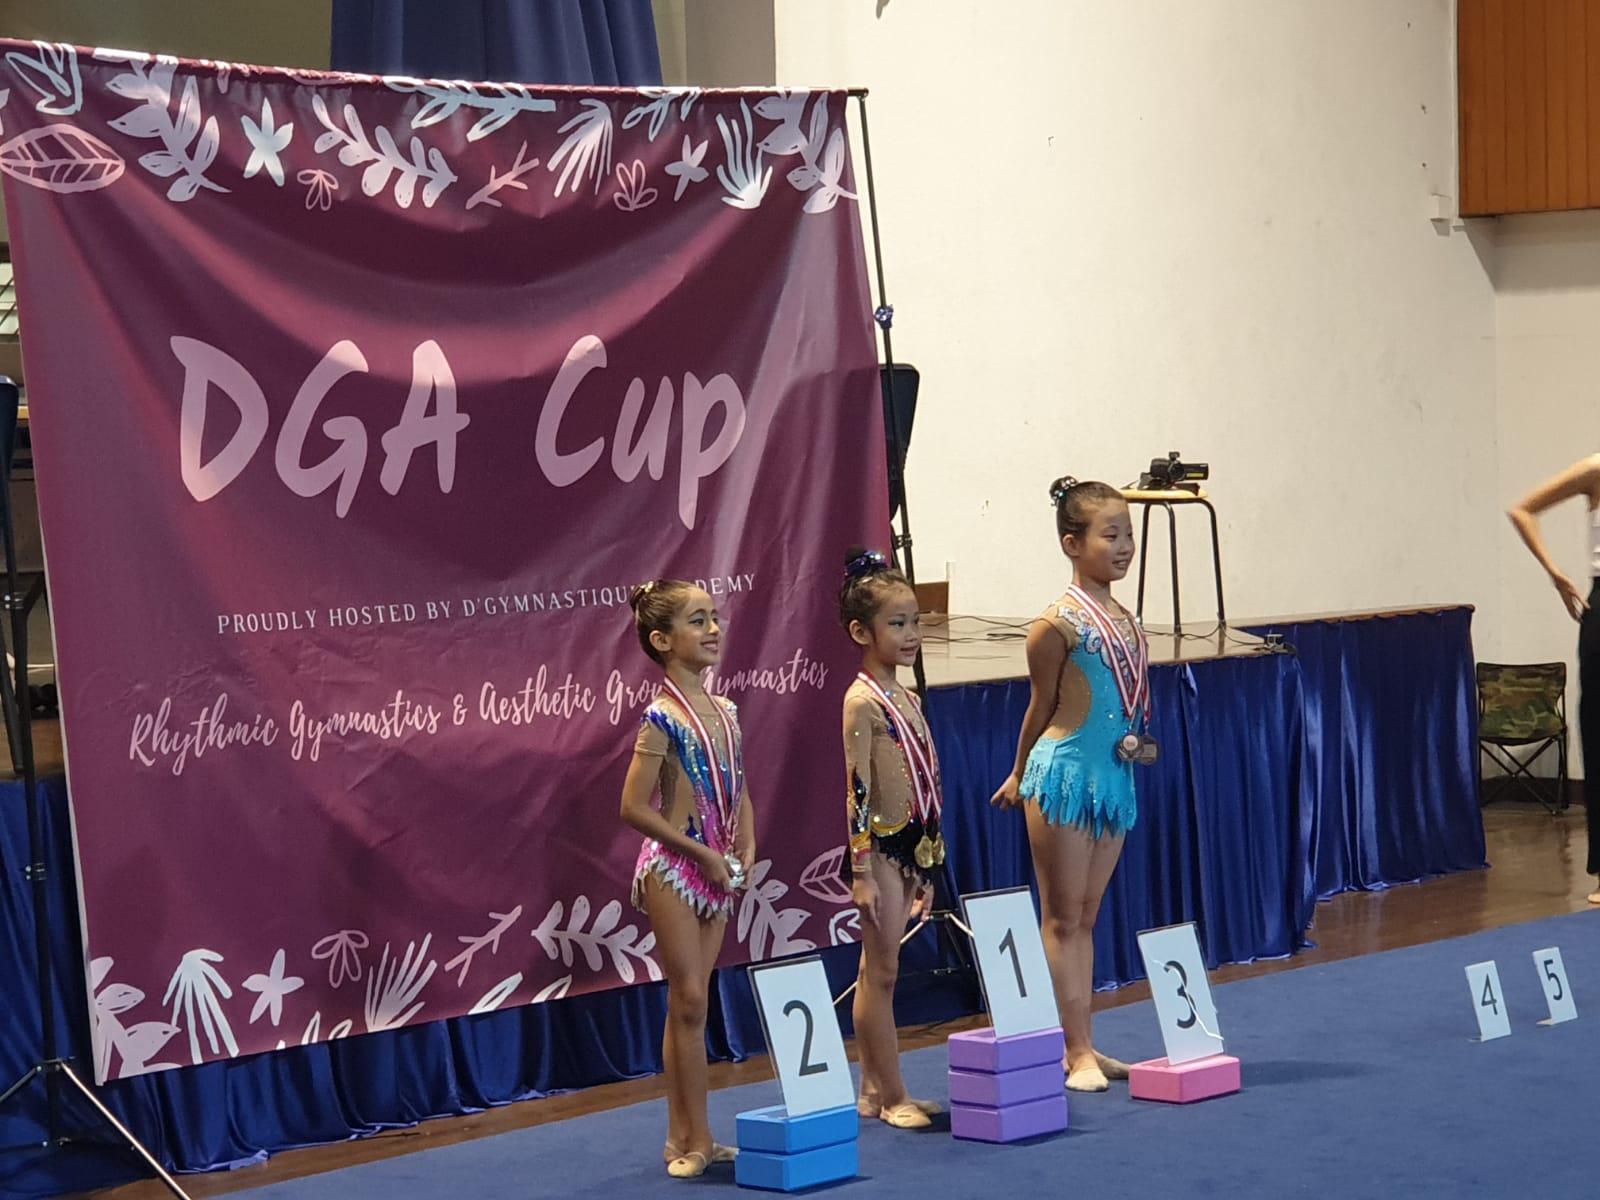 The 1st DGA Cup 2019 26